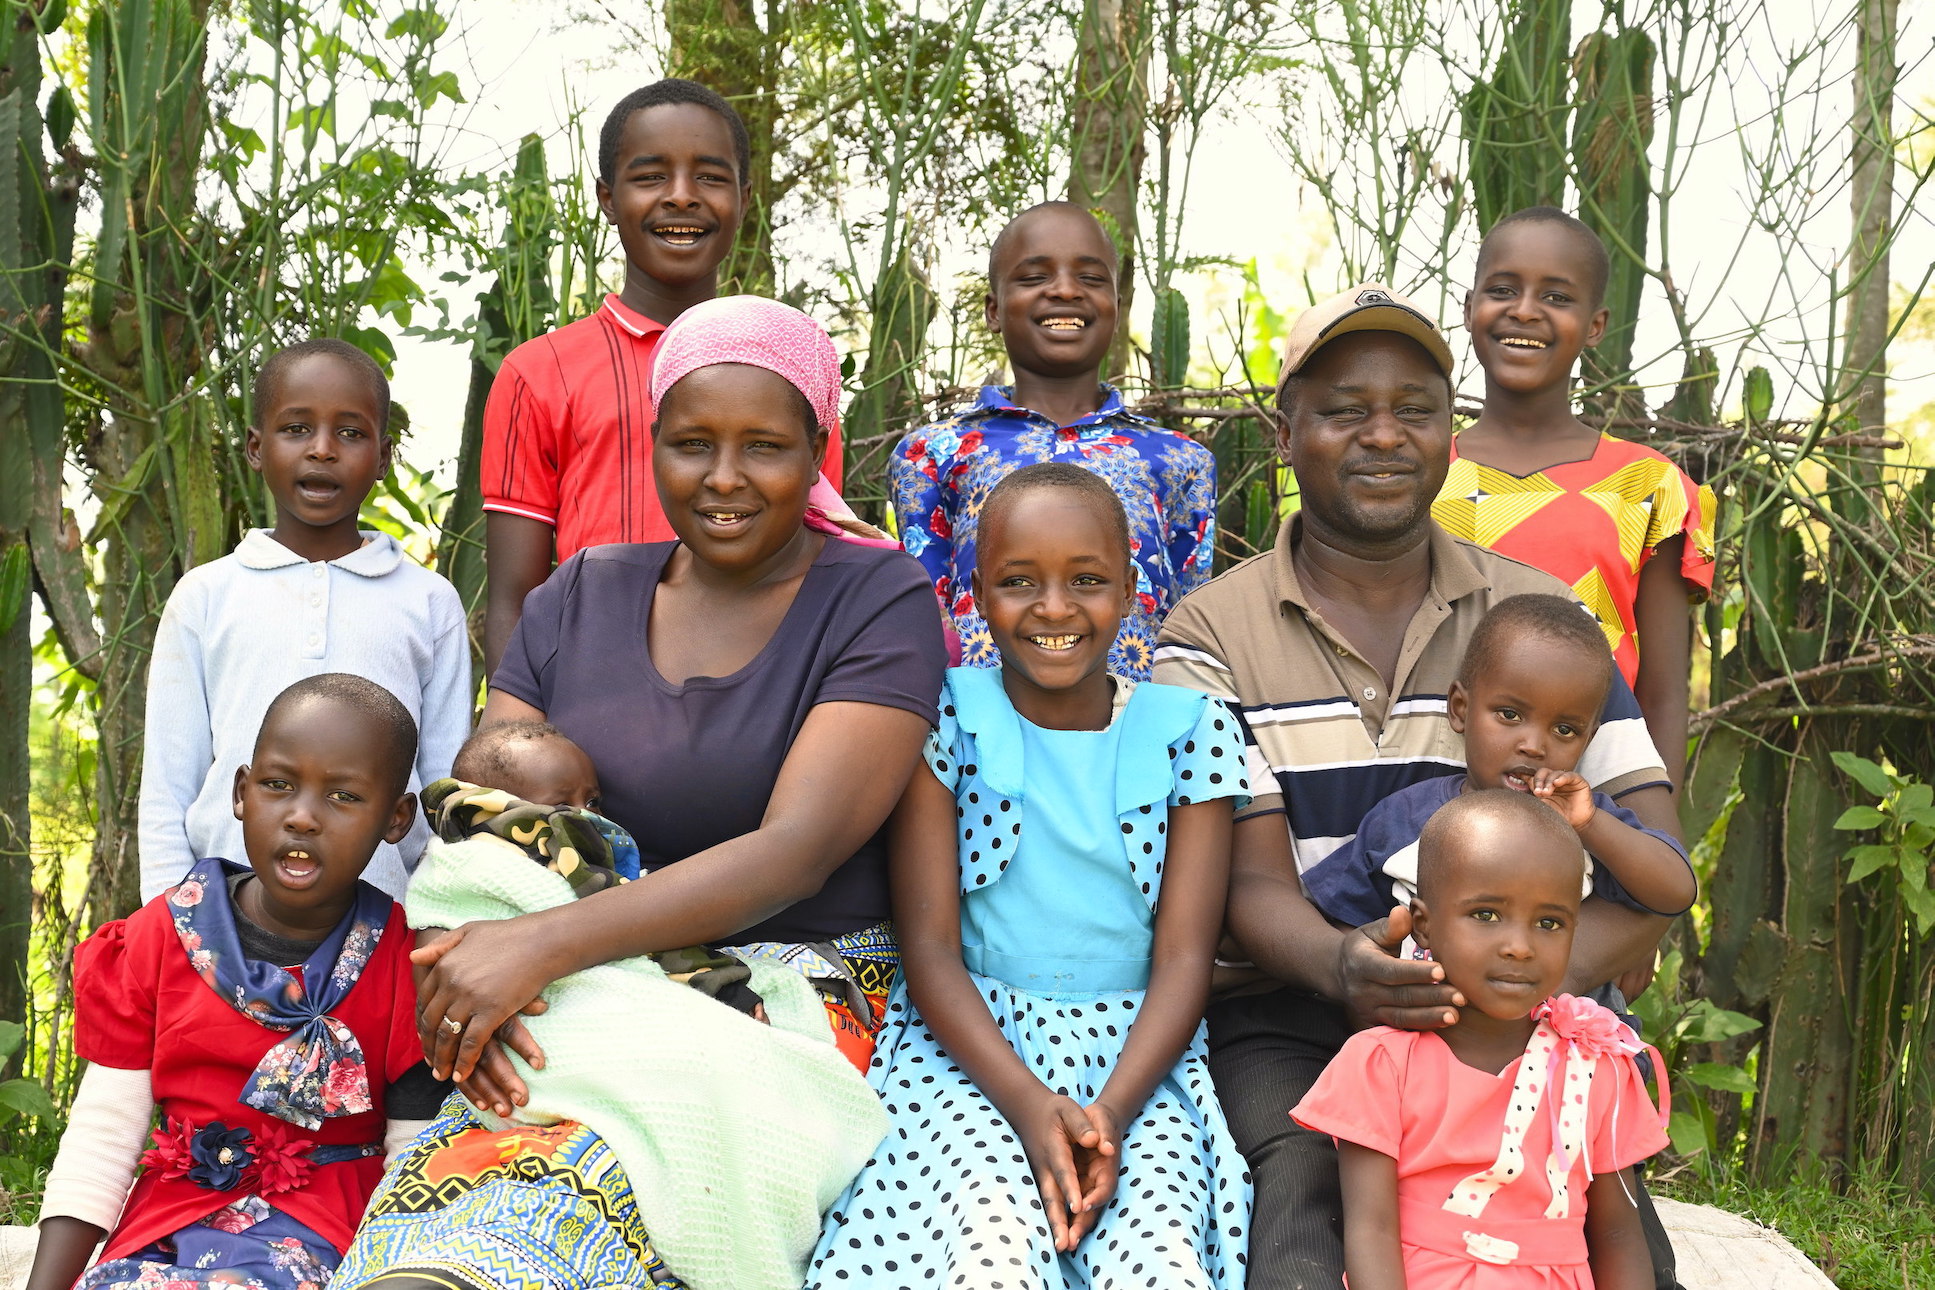 Anita's family is happy and healthy due to improved household food security and income.